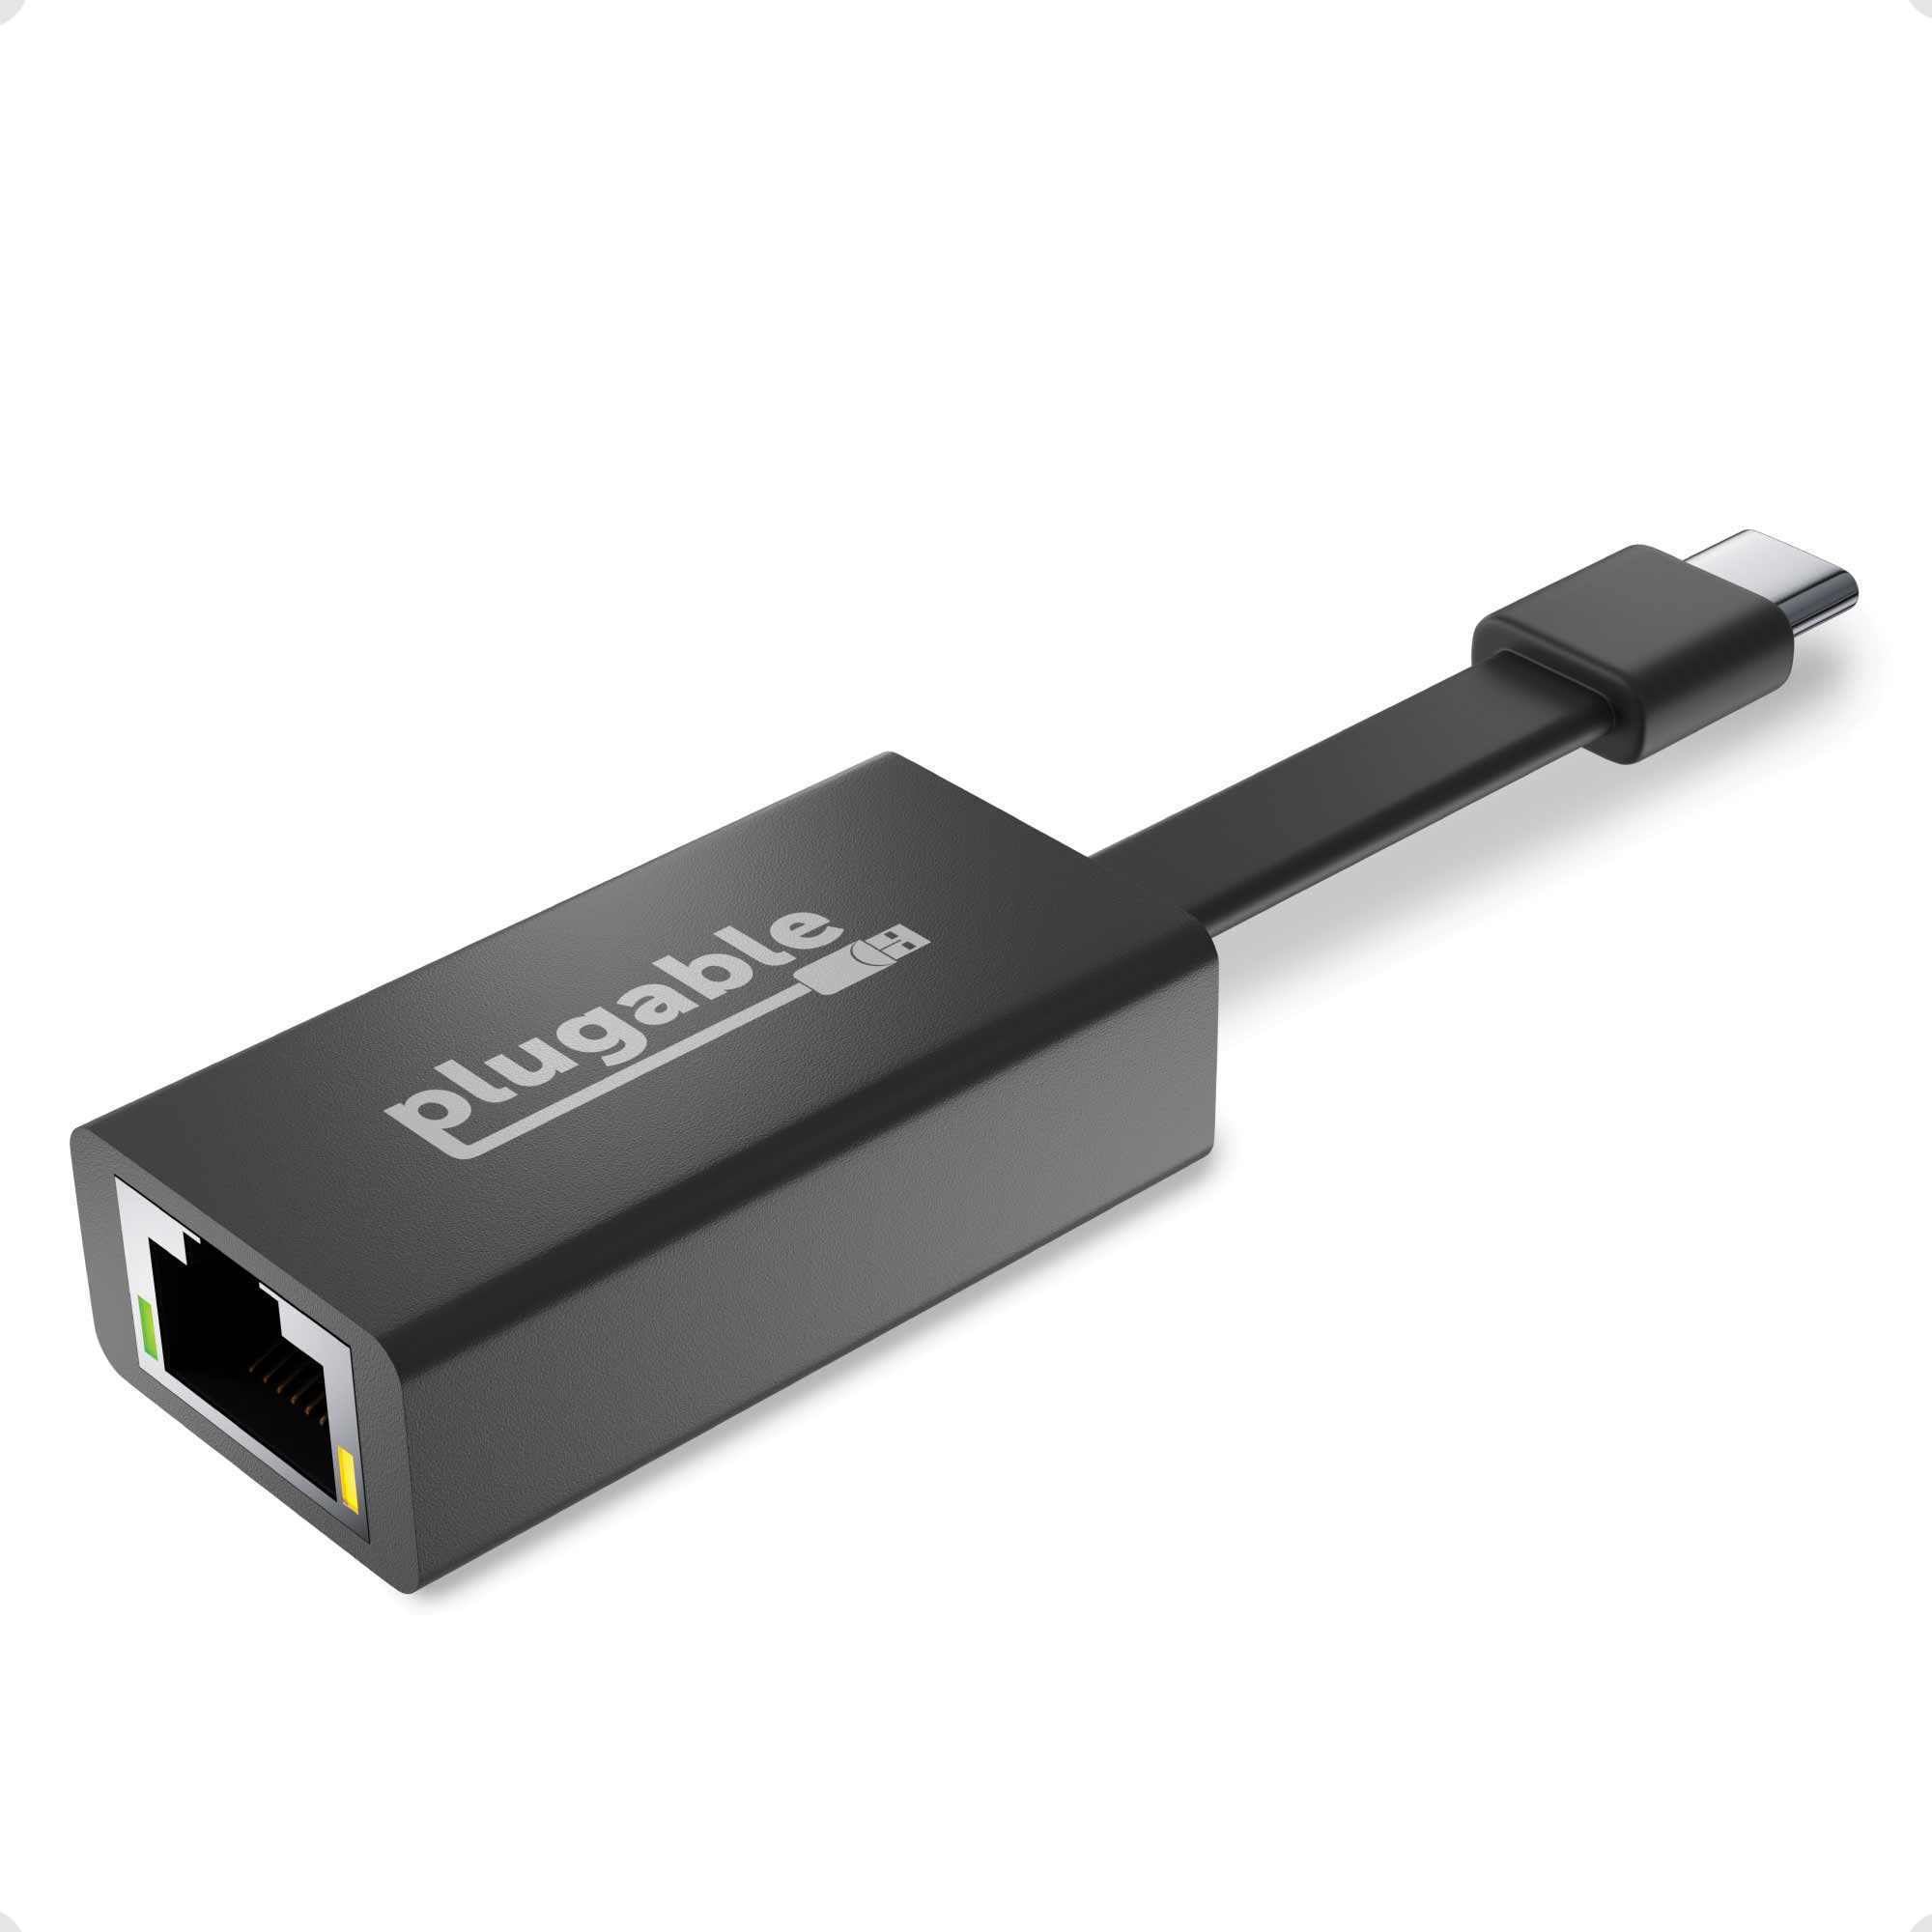 Plugable USB C to Ethernet Adapter, Driverless Fast and Reliable Gigabit Speed, Thunderbolt 3 to Ethernet Adapter Compatible with Macbook Pro, Windows, macOS, iPhone 15, and ChromeOS - image 1 of 8